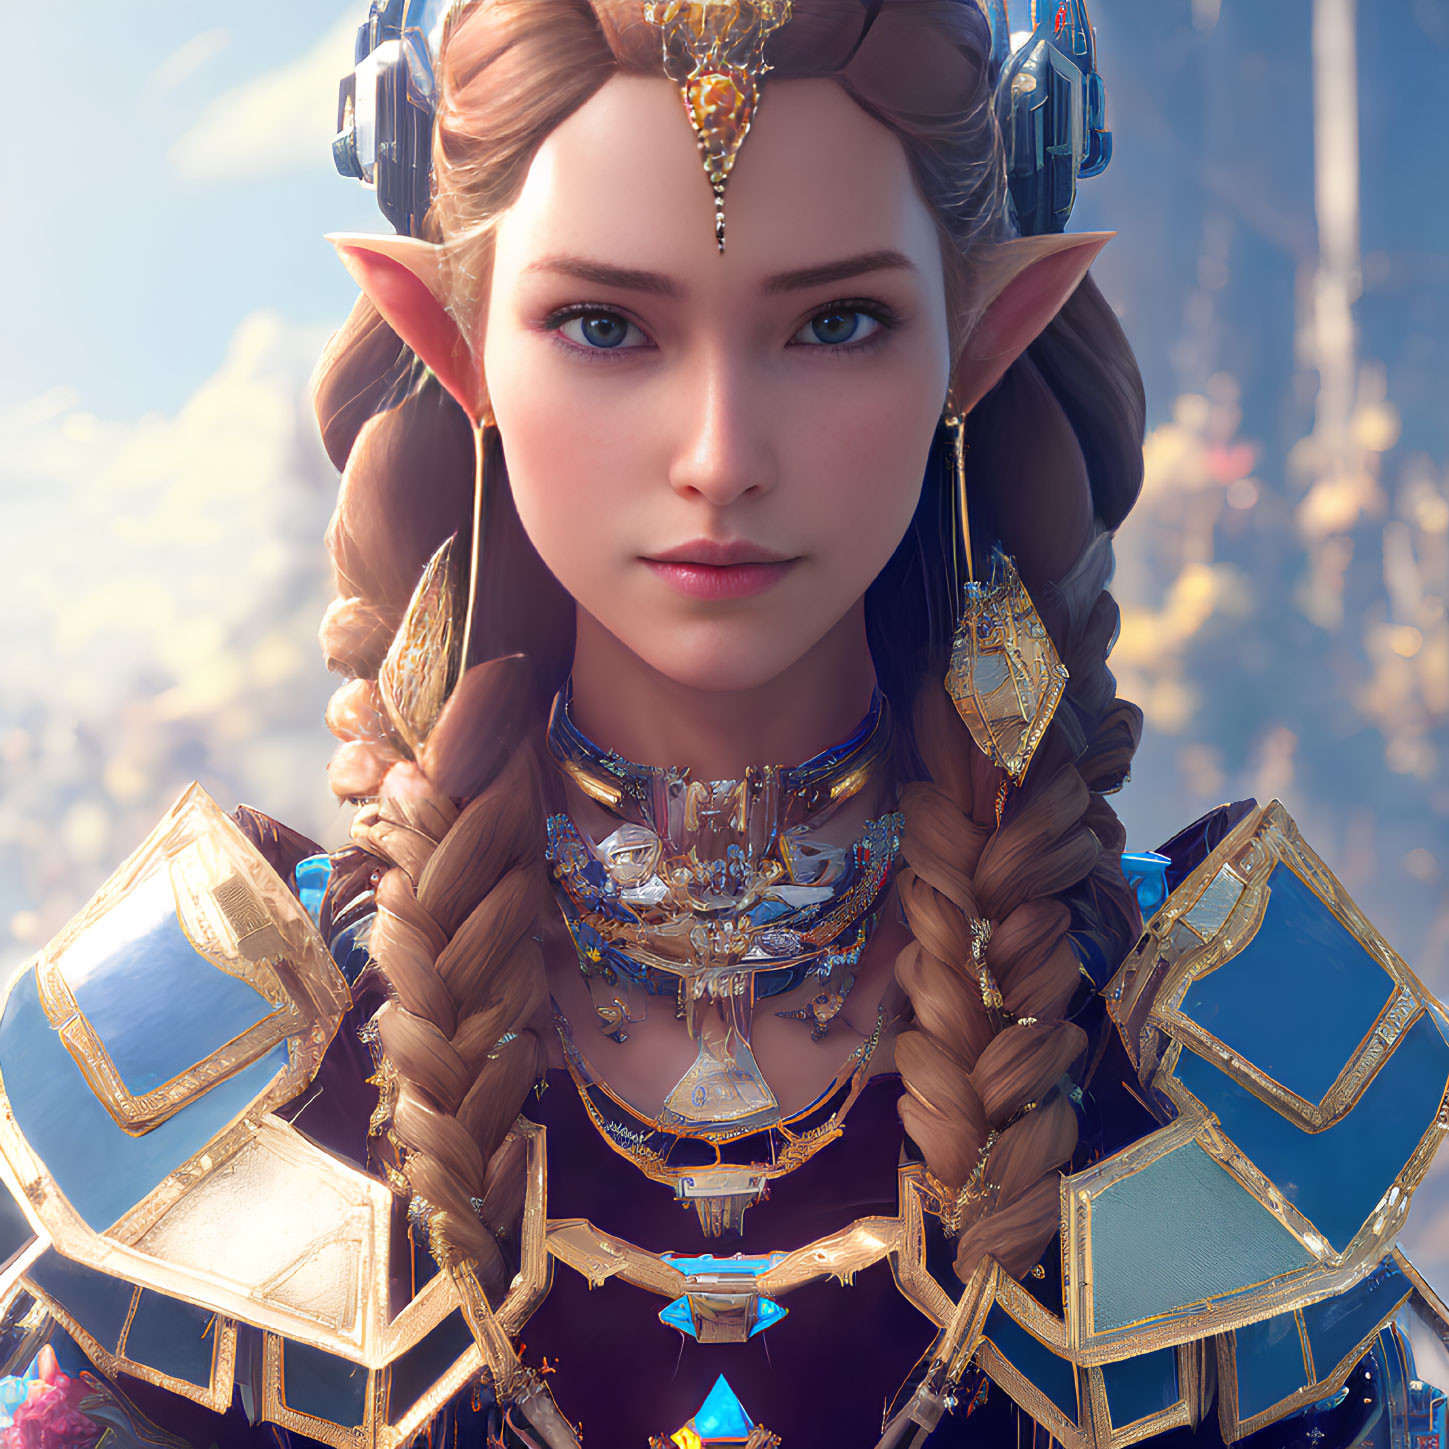 Detailed female elf digital artwork with intricate jewelry, braided hair, and armored costume.